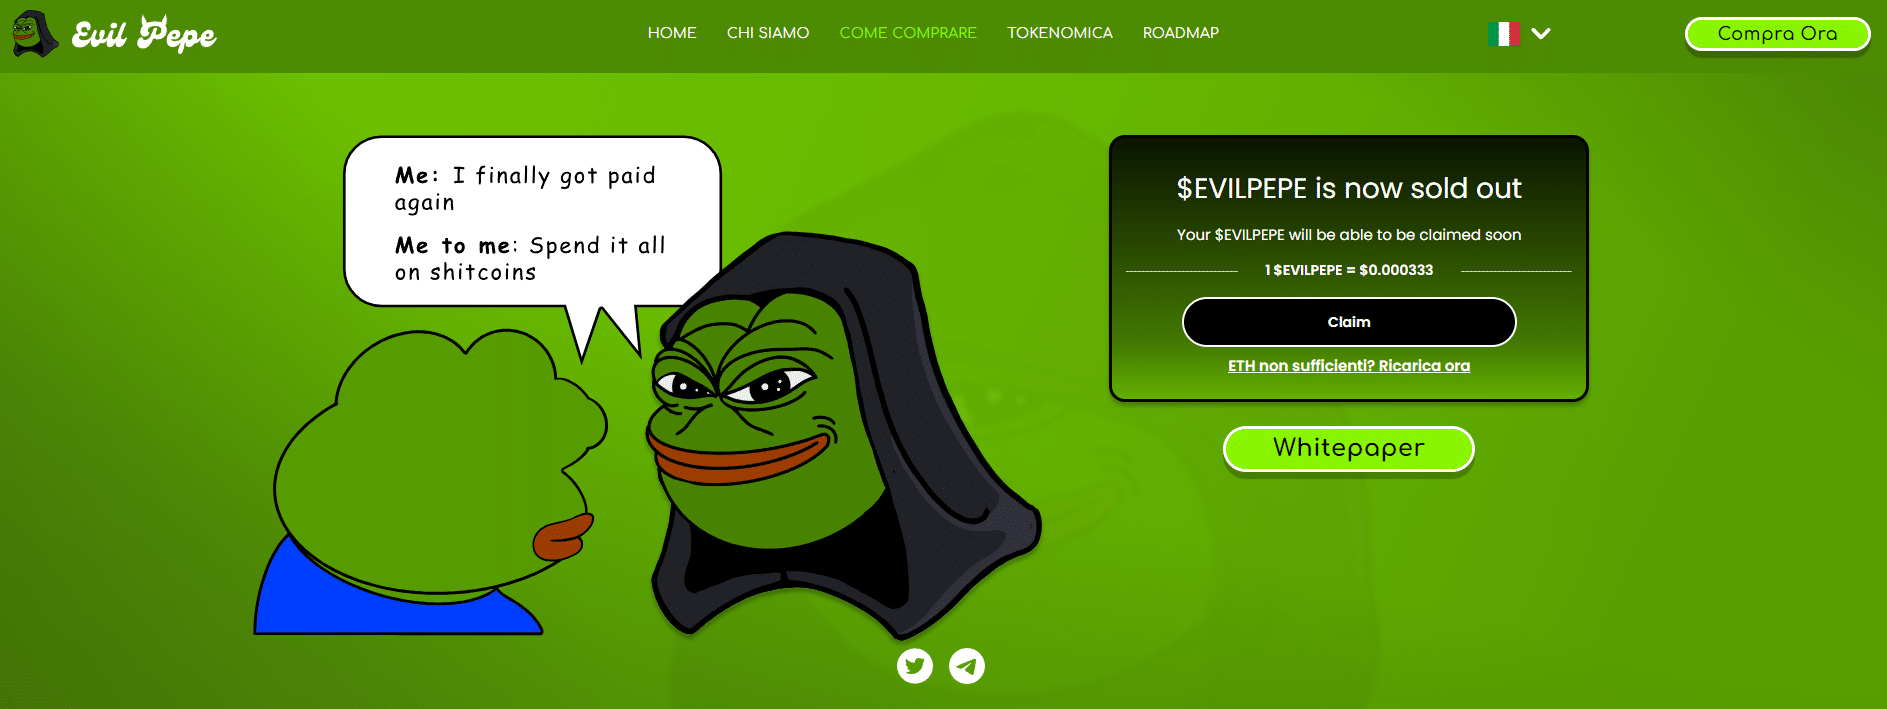 evil pepe coin